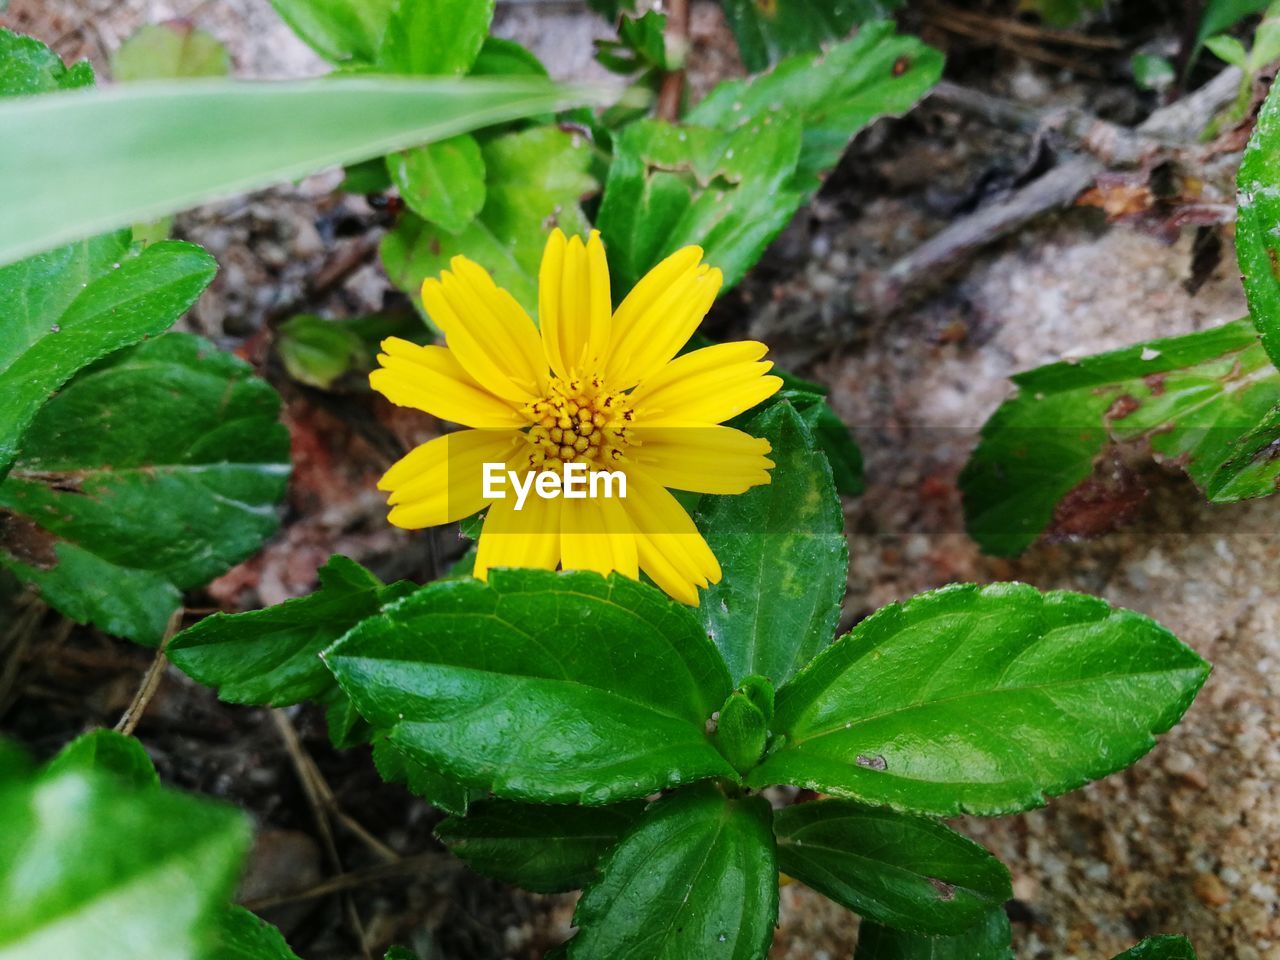 CLOSE-UP OF YELLOW FLOWERING PLANT ON LEAF